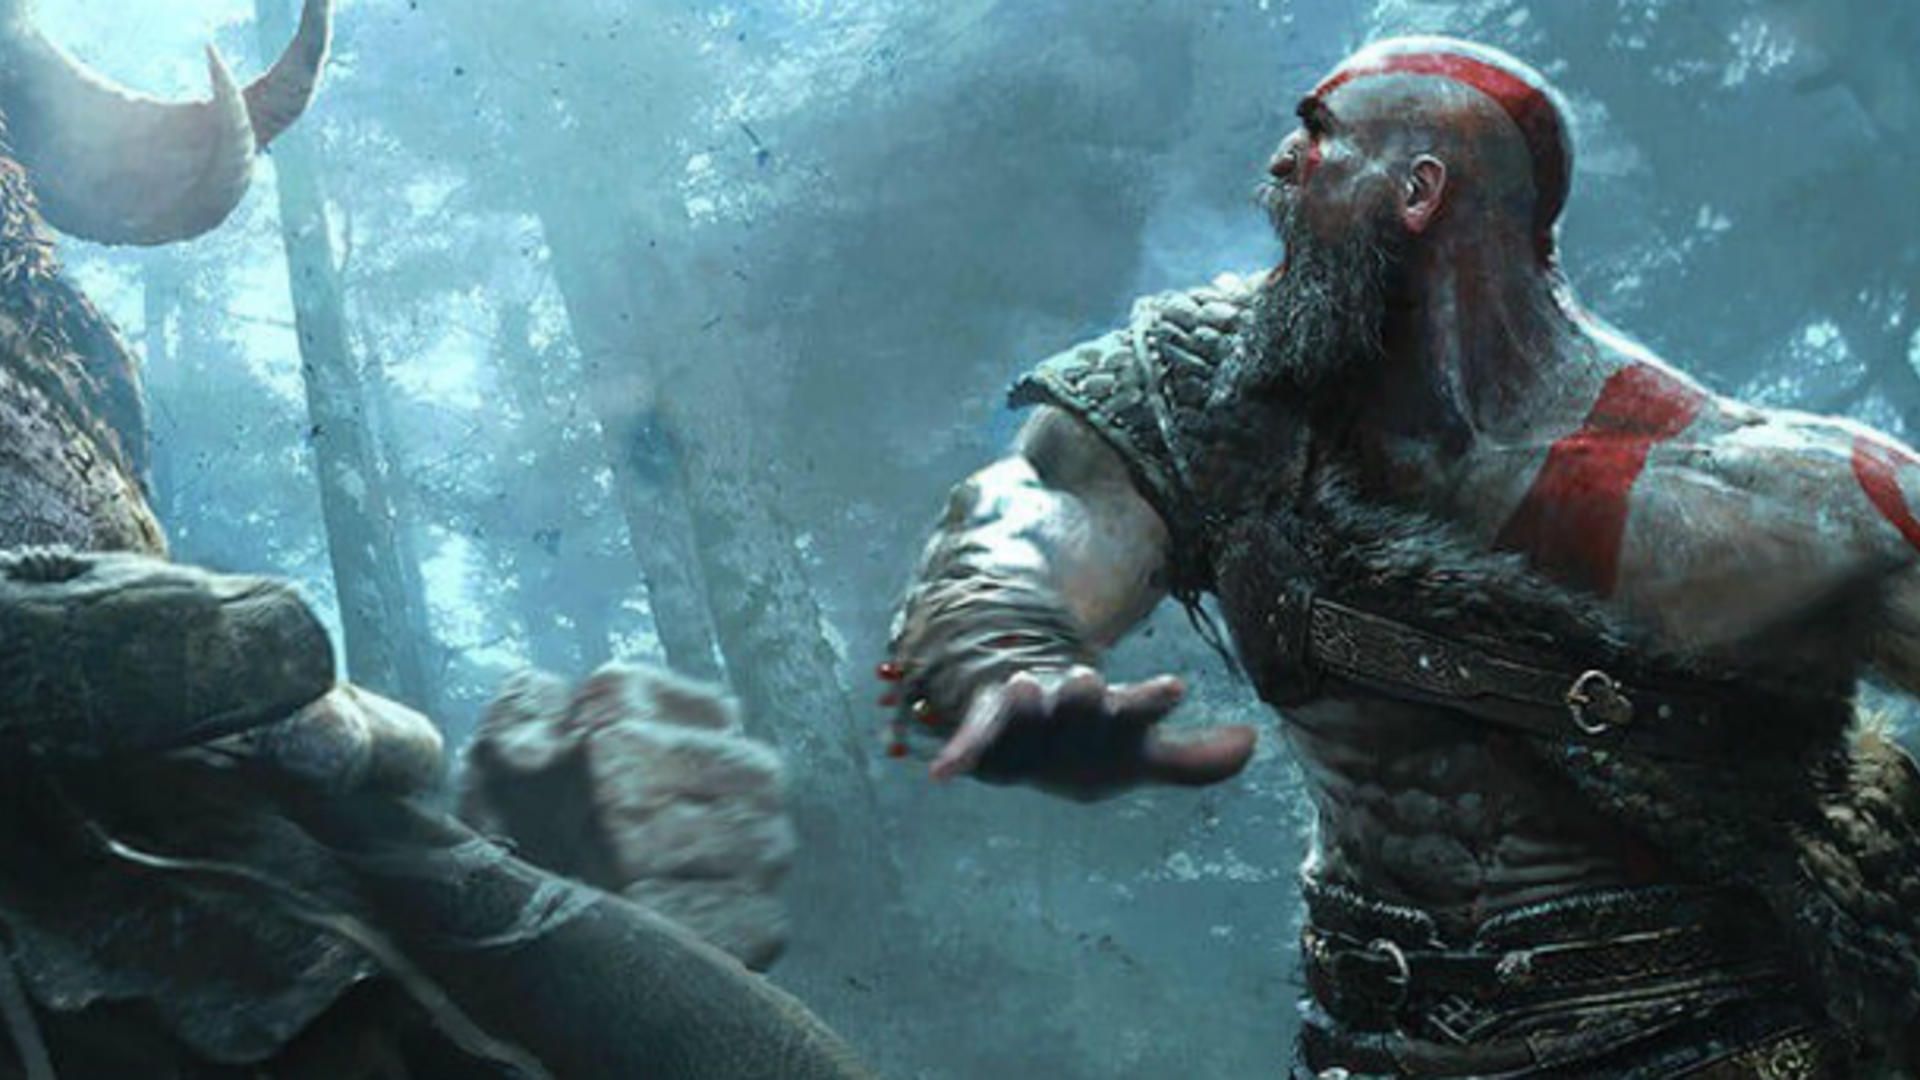 God of War Is Stunning in 4K and HDR, But Lacks a Locked Frame Rate